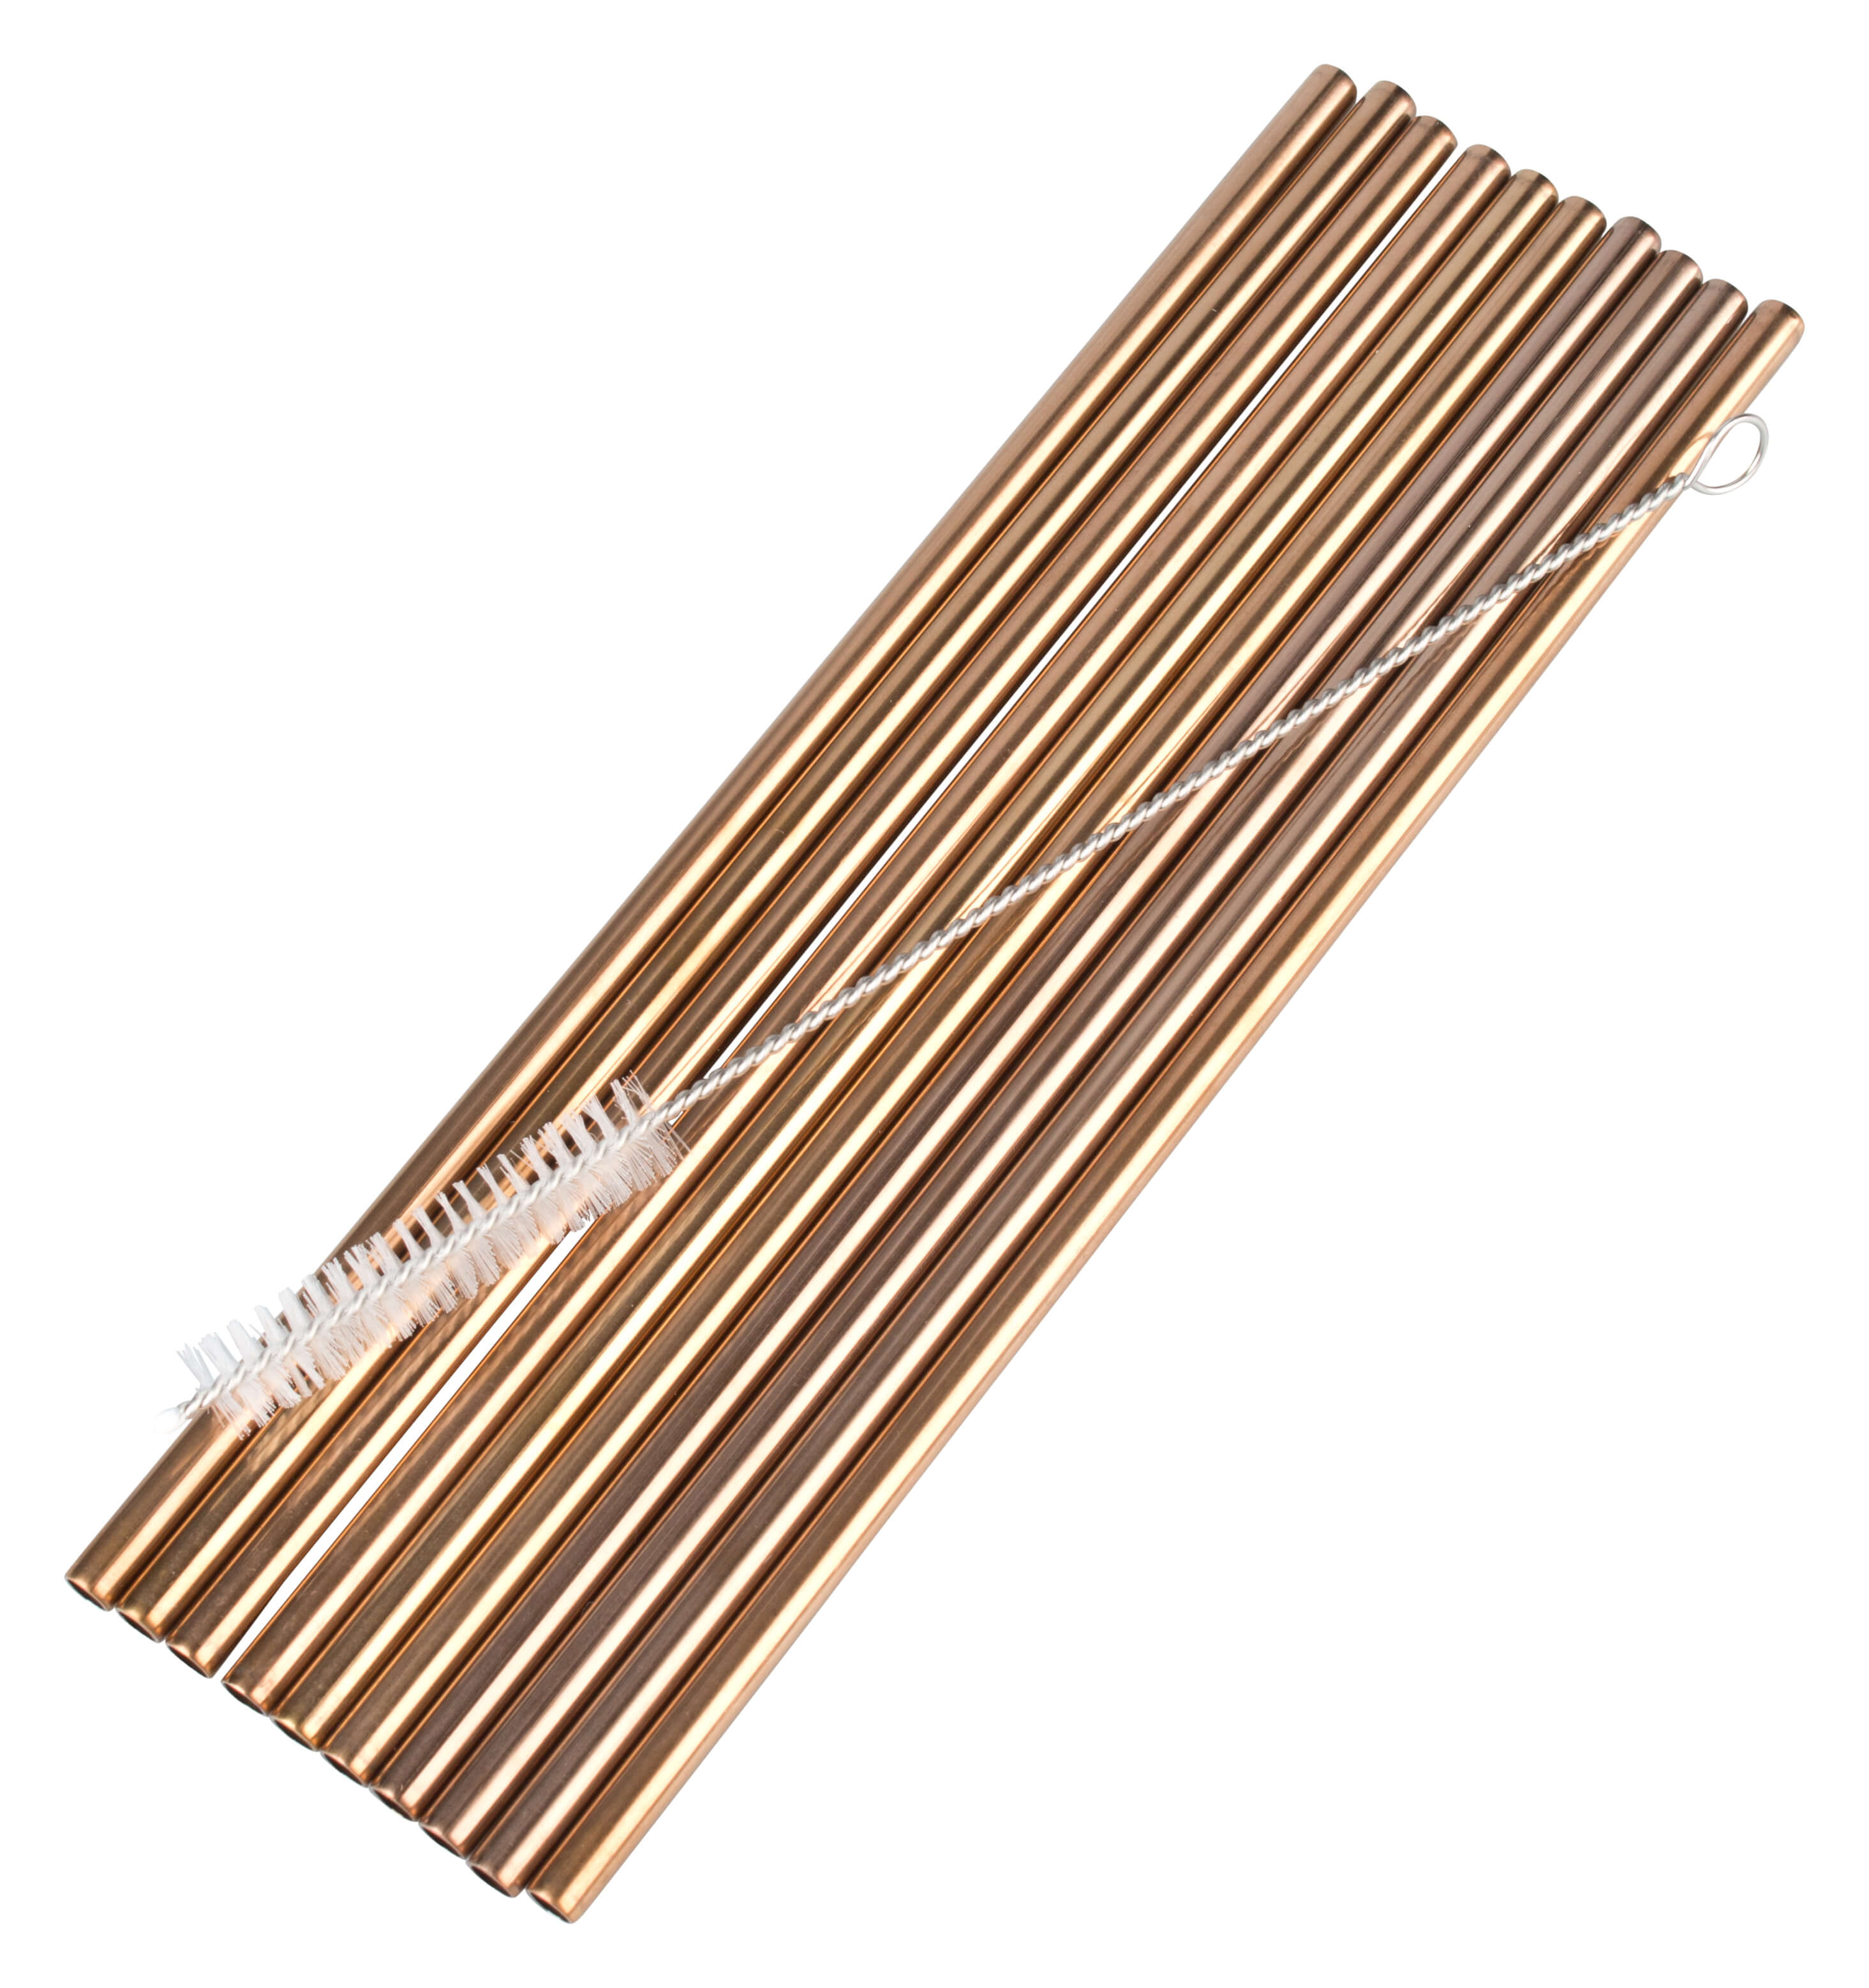 Drinking straws, stainless steel (6x215mm), copper-colored - 10 pcs. plus cleaning brush